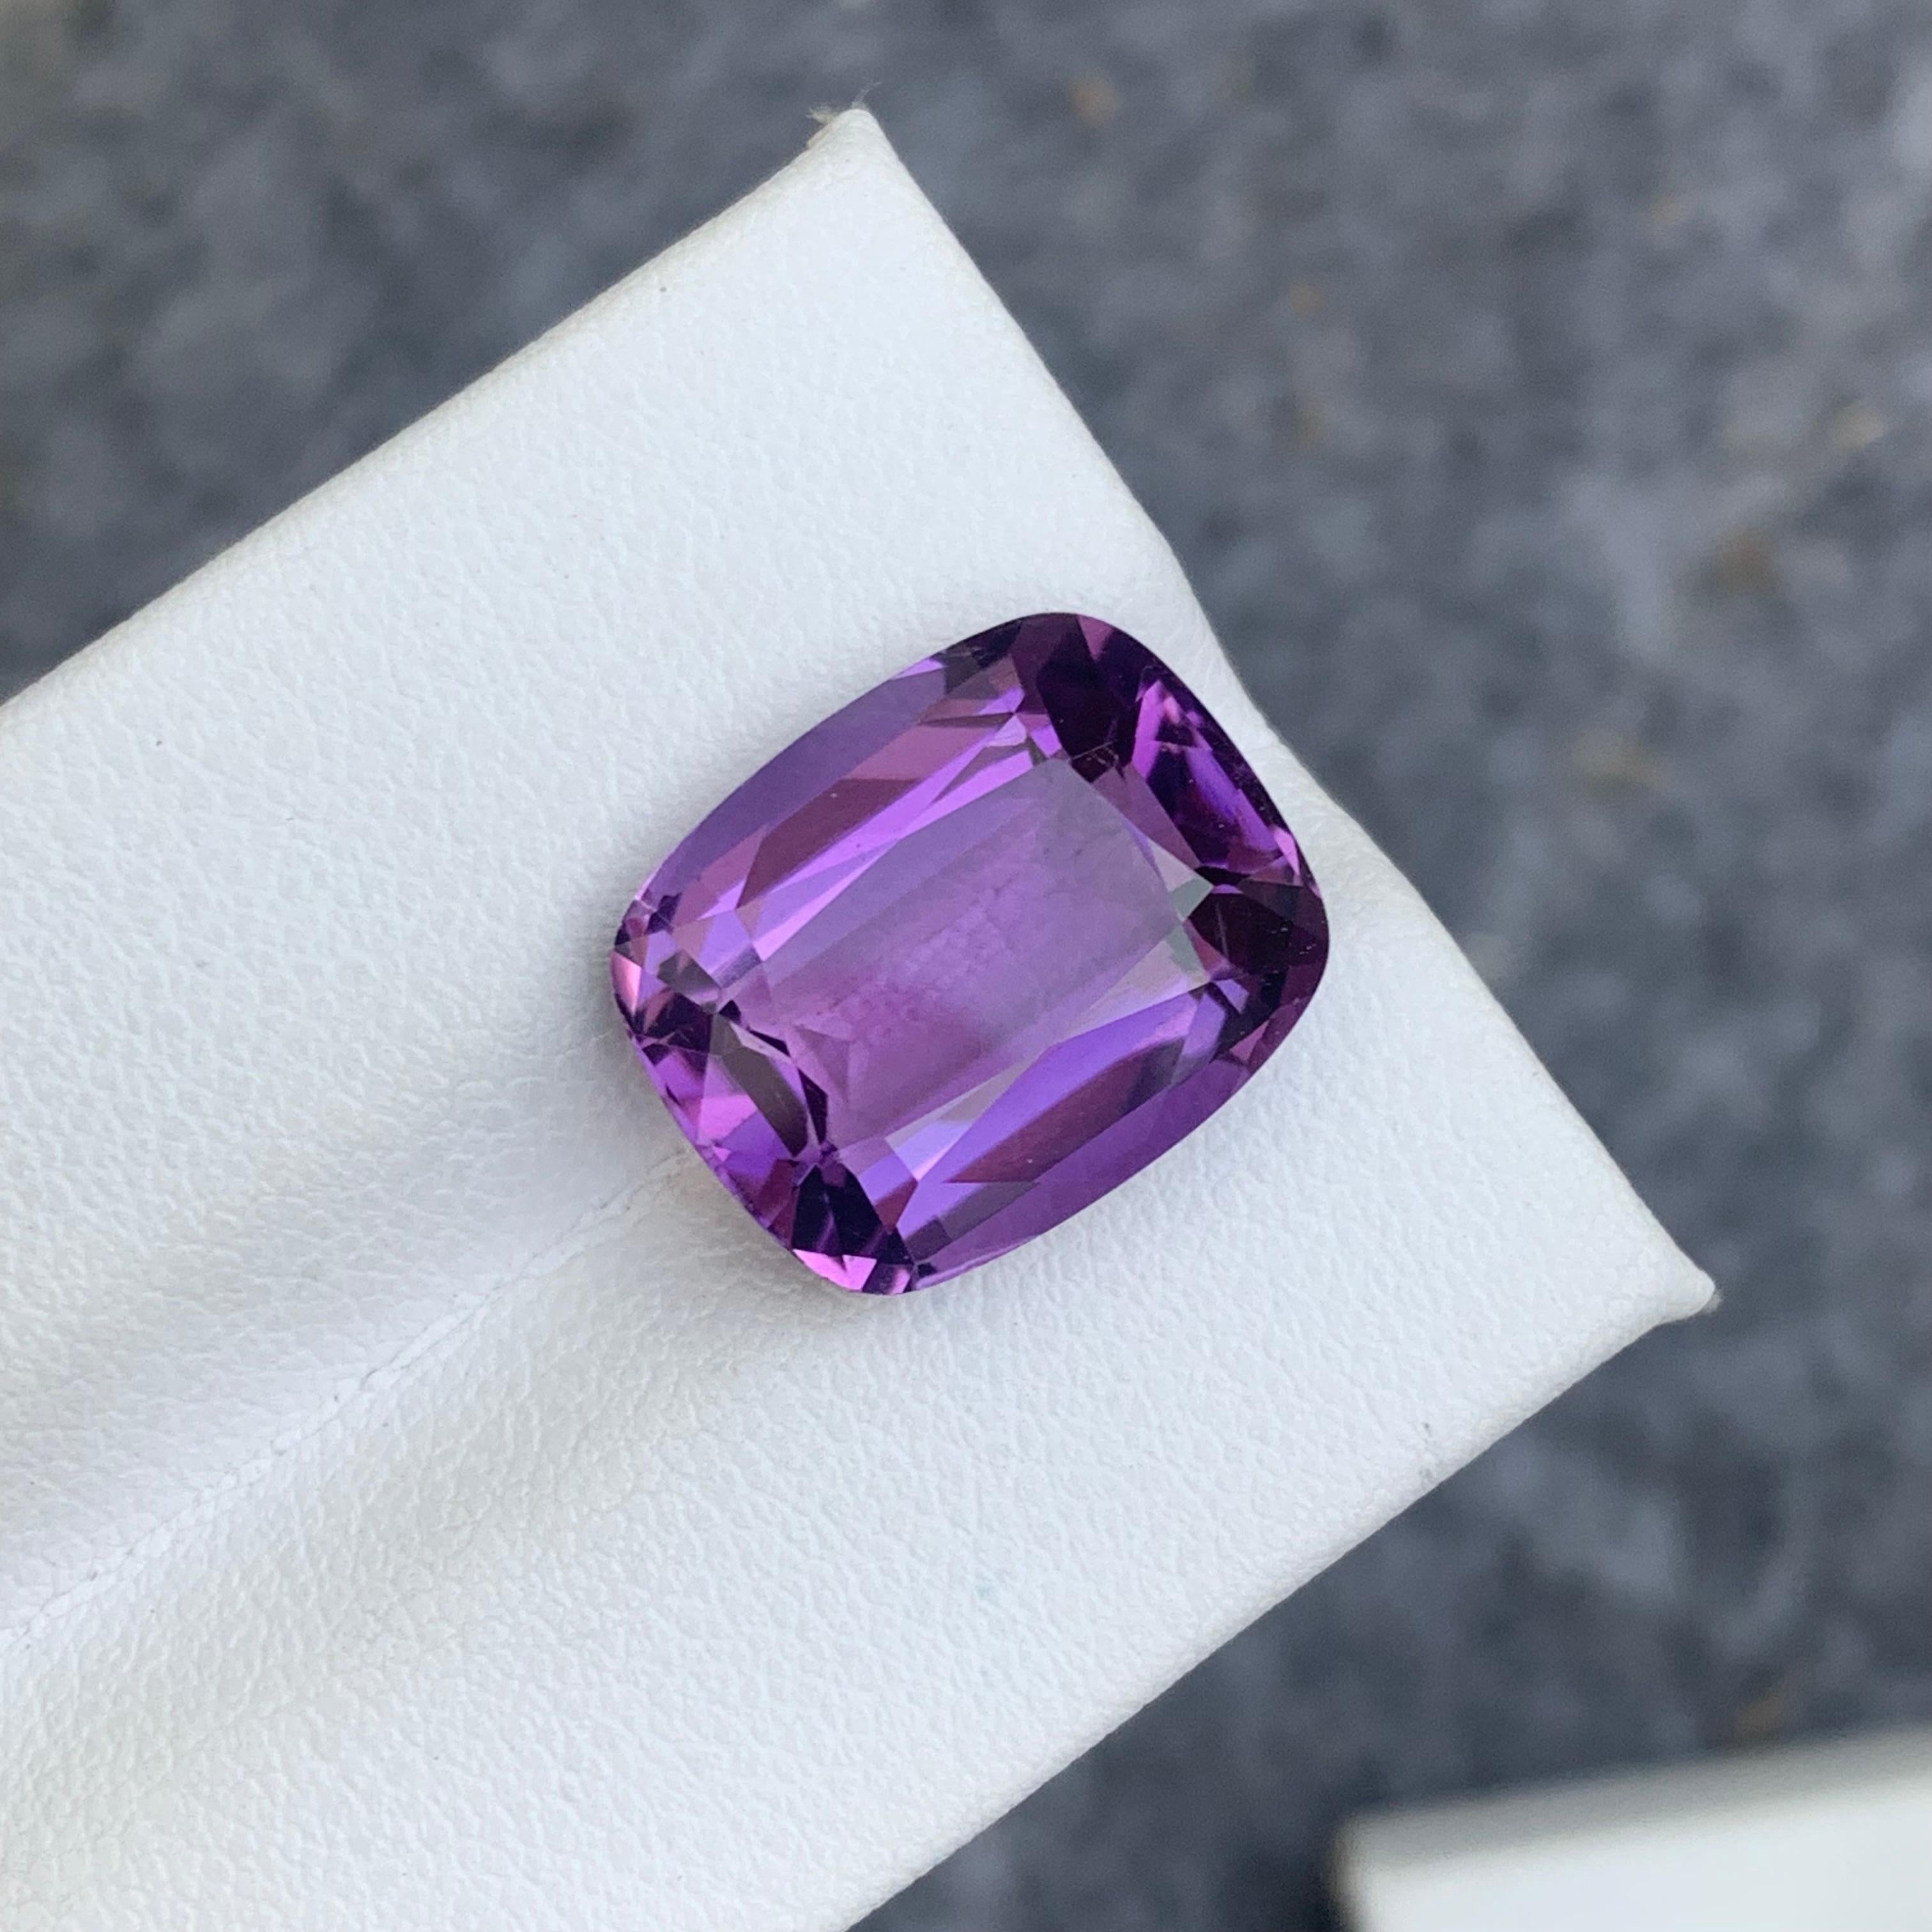 Gemstone Type : Amethyst
Weight : 9.10 Carats
Dimensions : 15.1x12.3x7.3 mm
Clarity : Eye Clean(SI)
Origin : Brazil
Color: Purple
Shape: Cushion
Certificate: On Demand
Month: February
.

Purported amethyst powers for healing
enhancing the immune